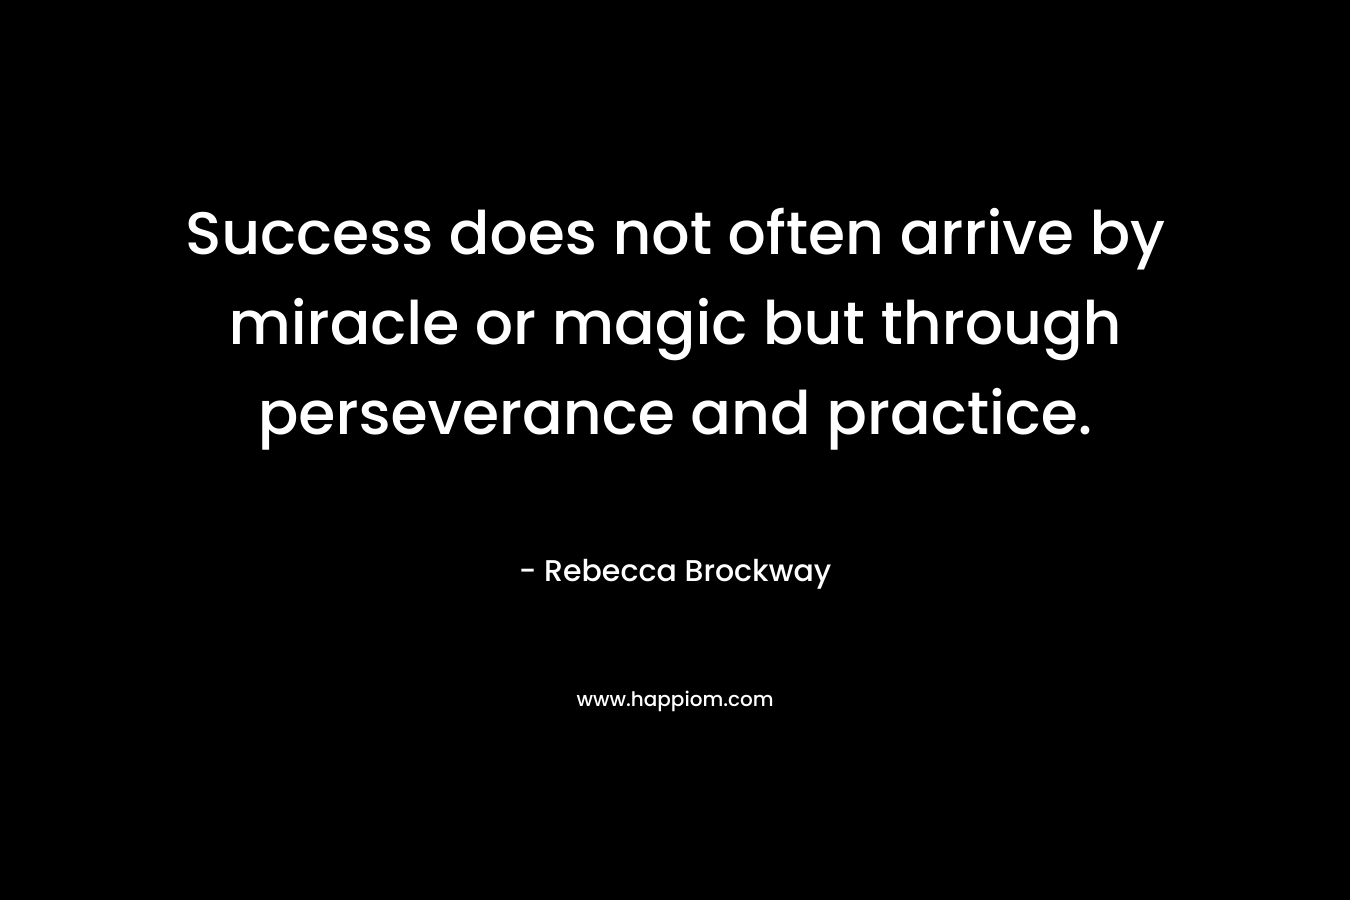 Success does not often arrive by miracle or magic but through perseverance and practice. – Rebecca Brockway